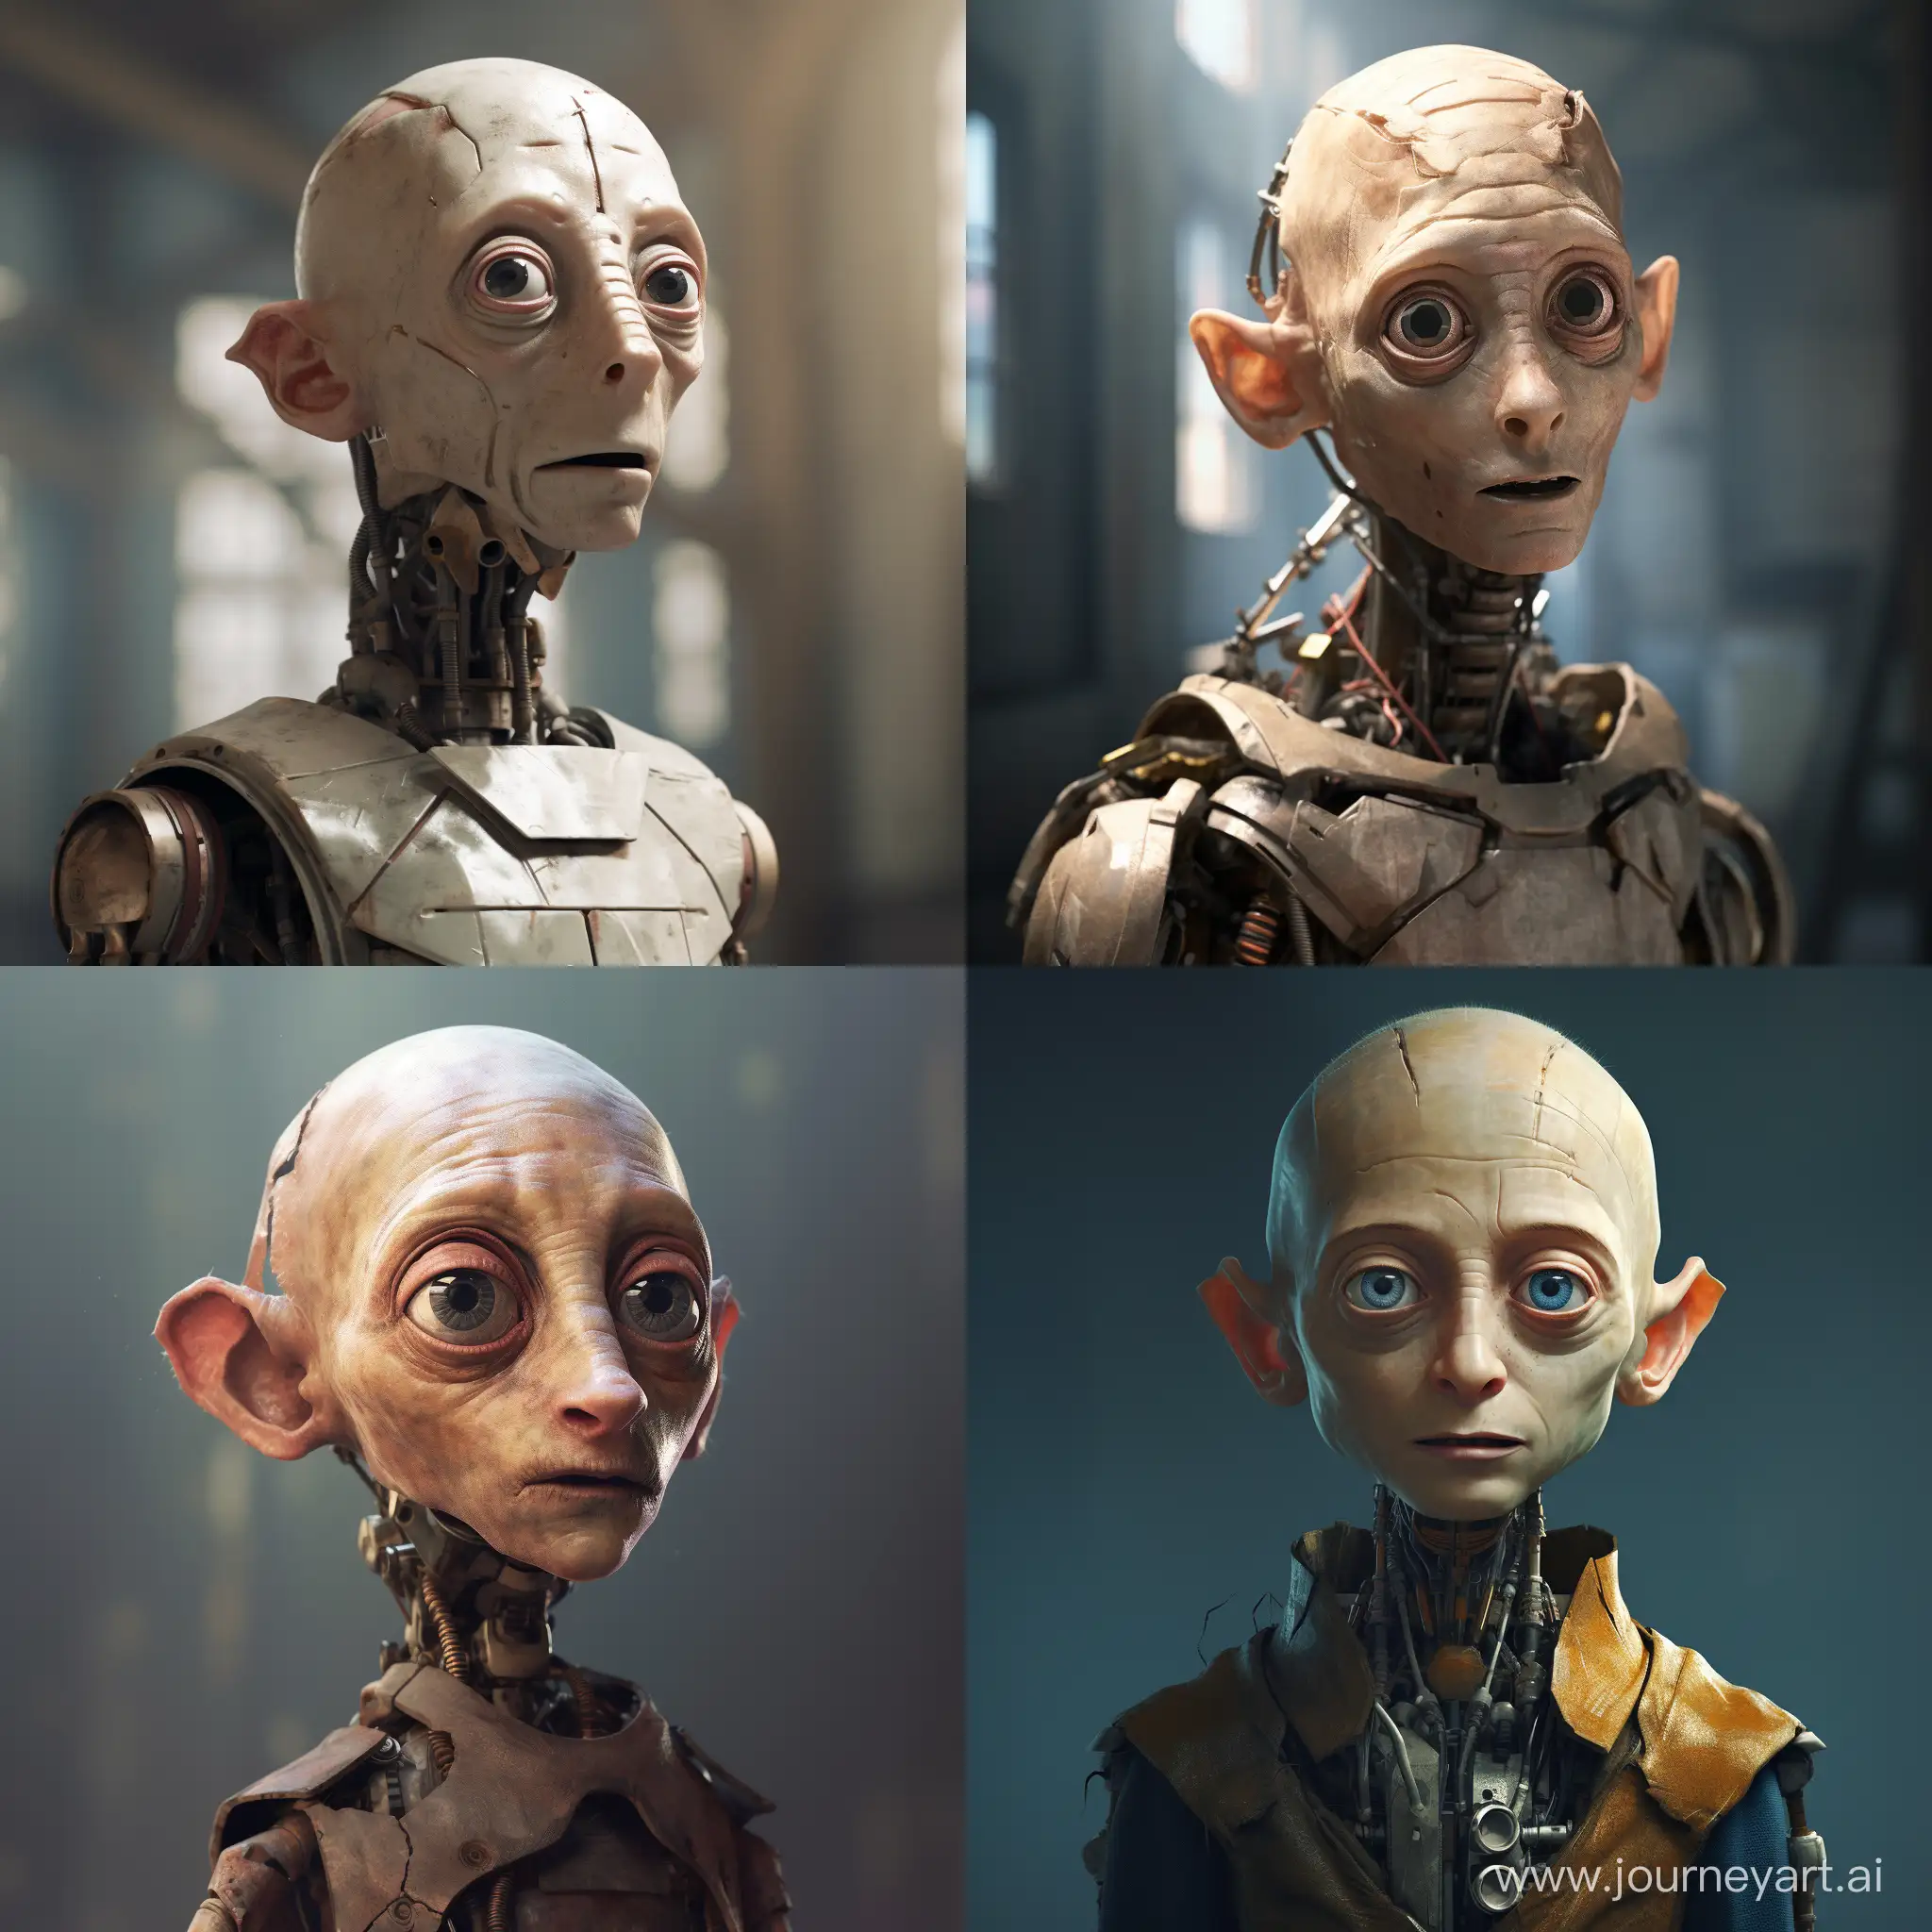 dobby from harry potter as robbot